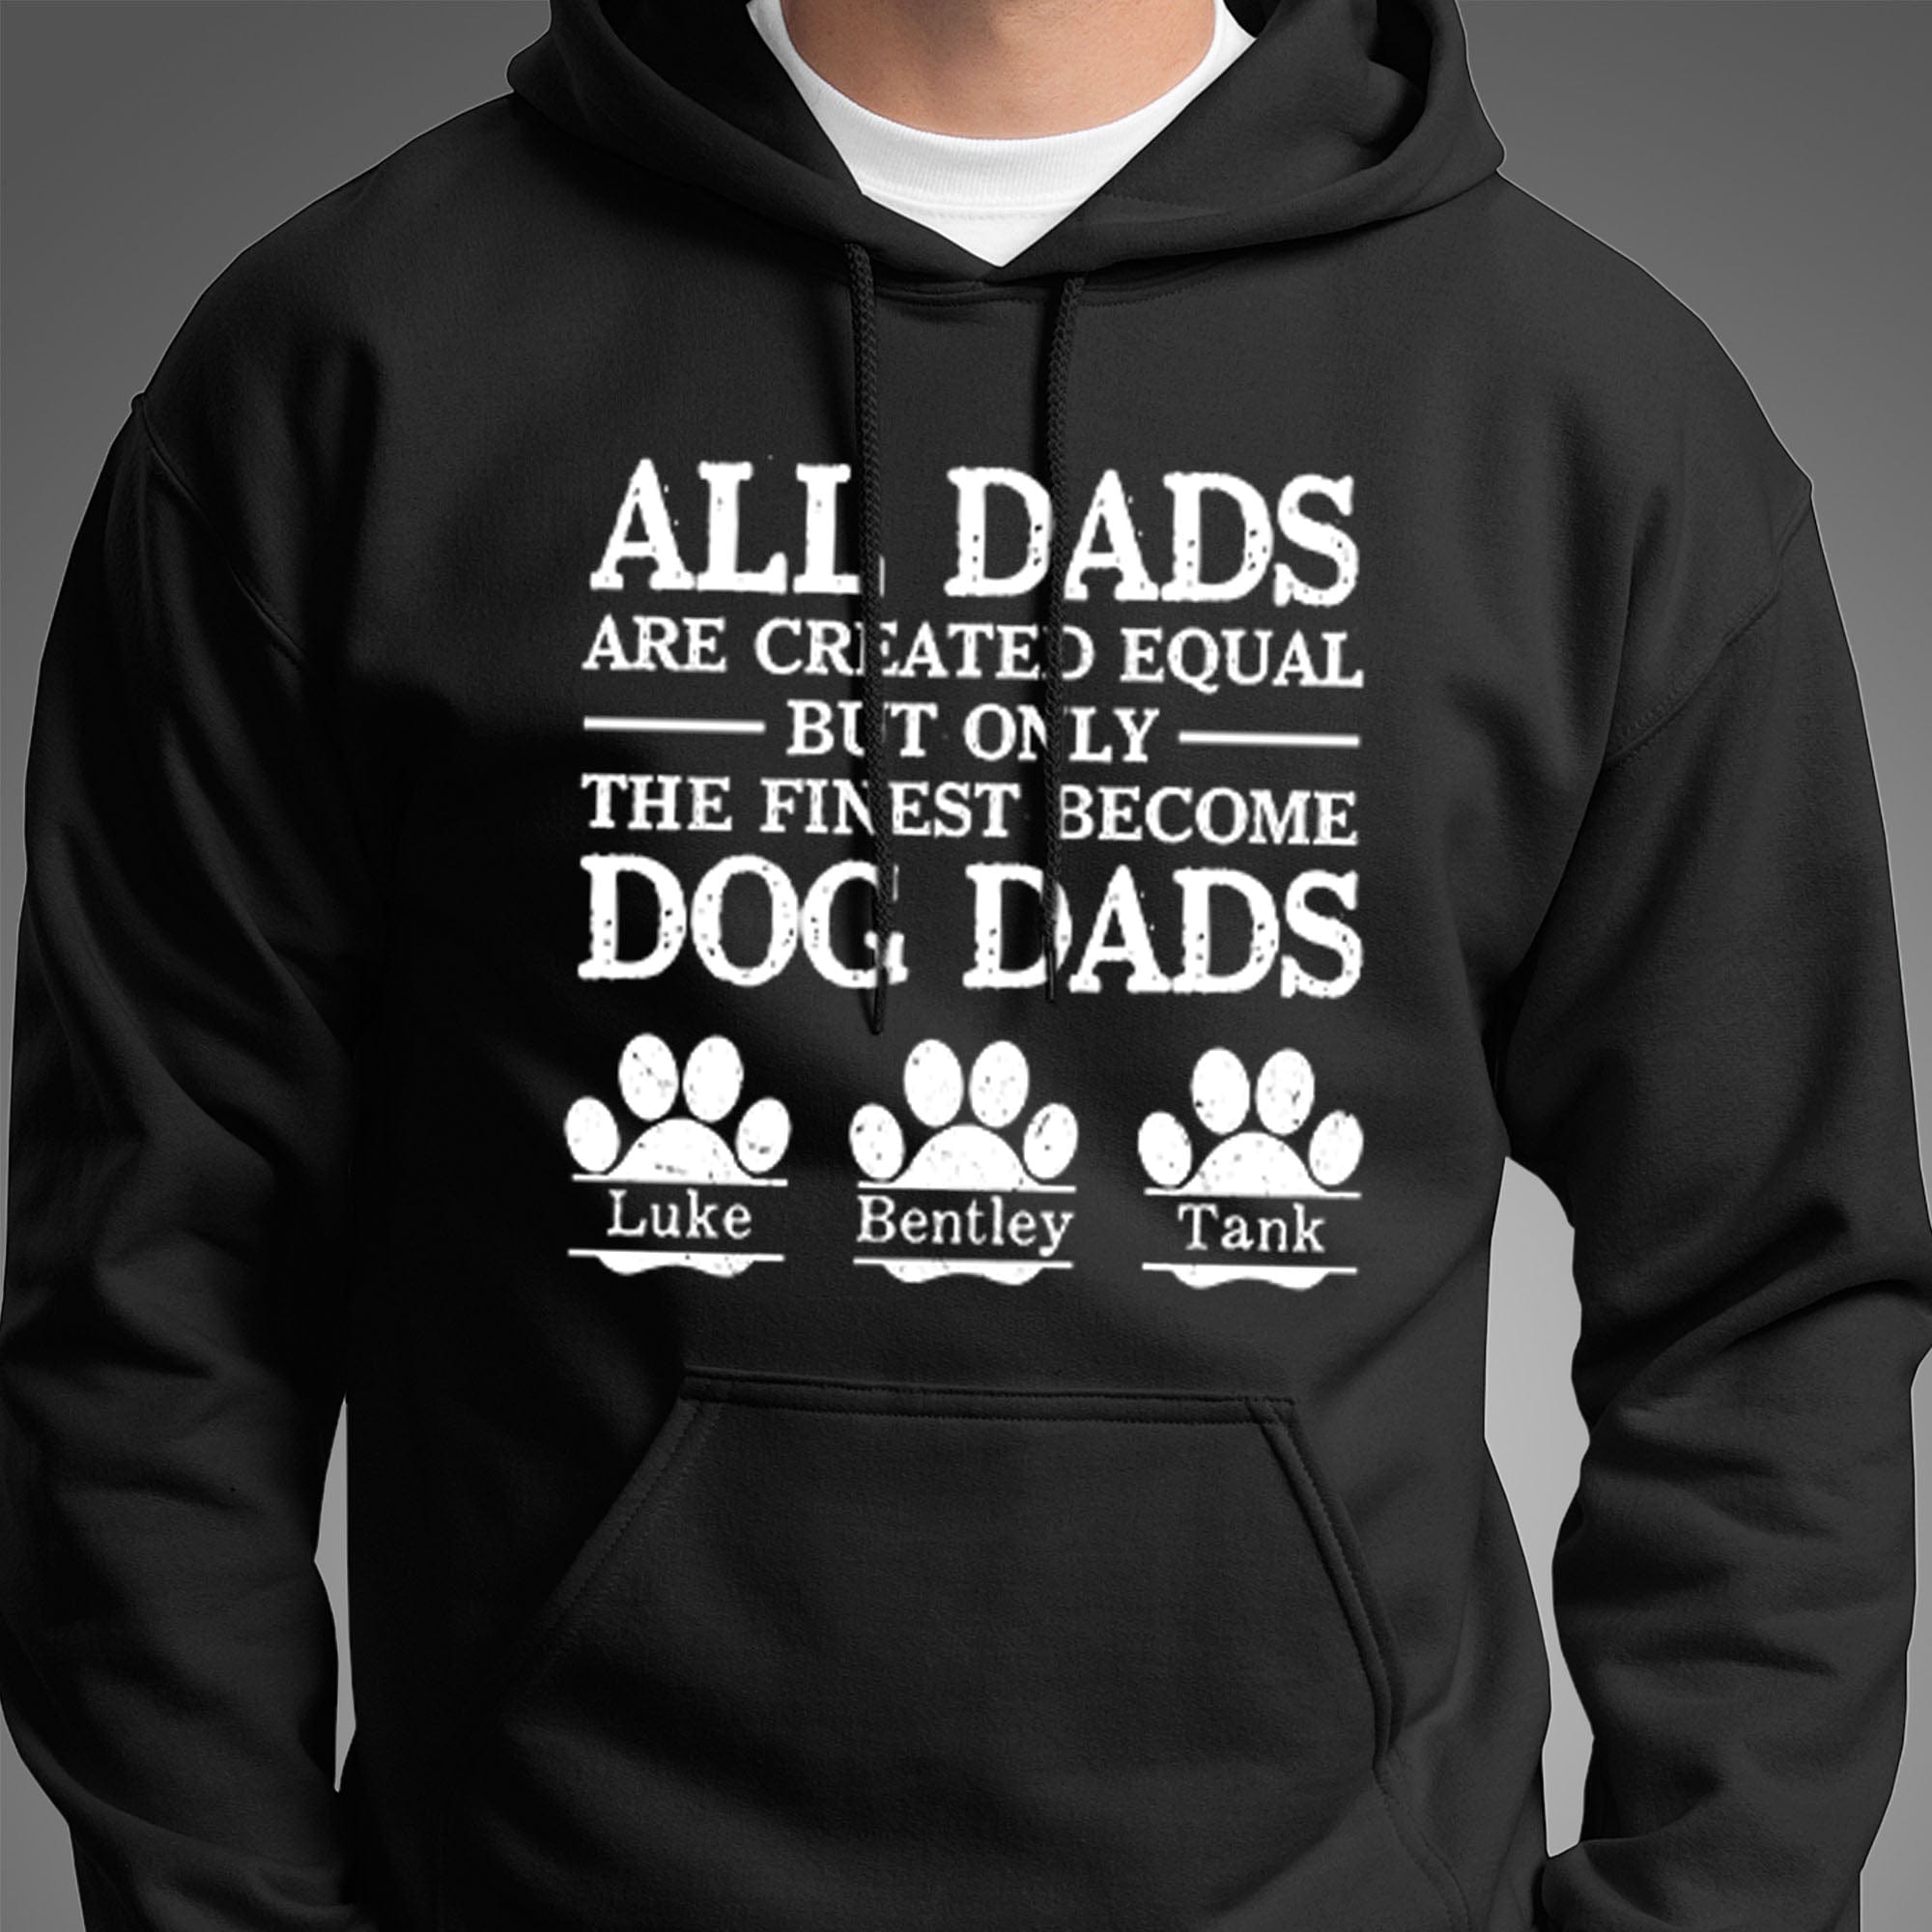 GeckoCustom All Dads Are Created Equal Personalized Dog Dad Shirt C238 Basic Tee / Black / S